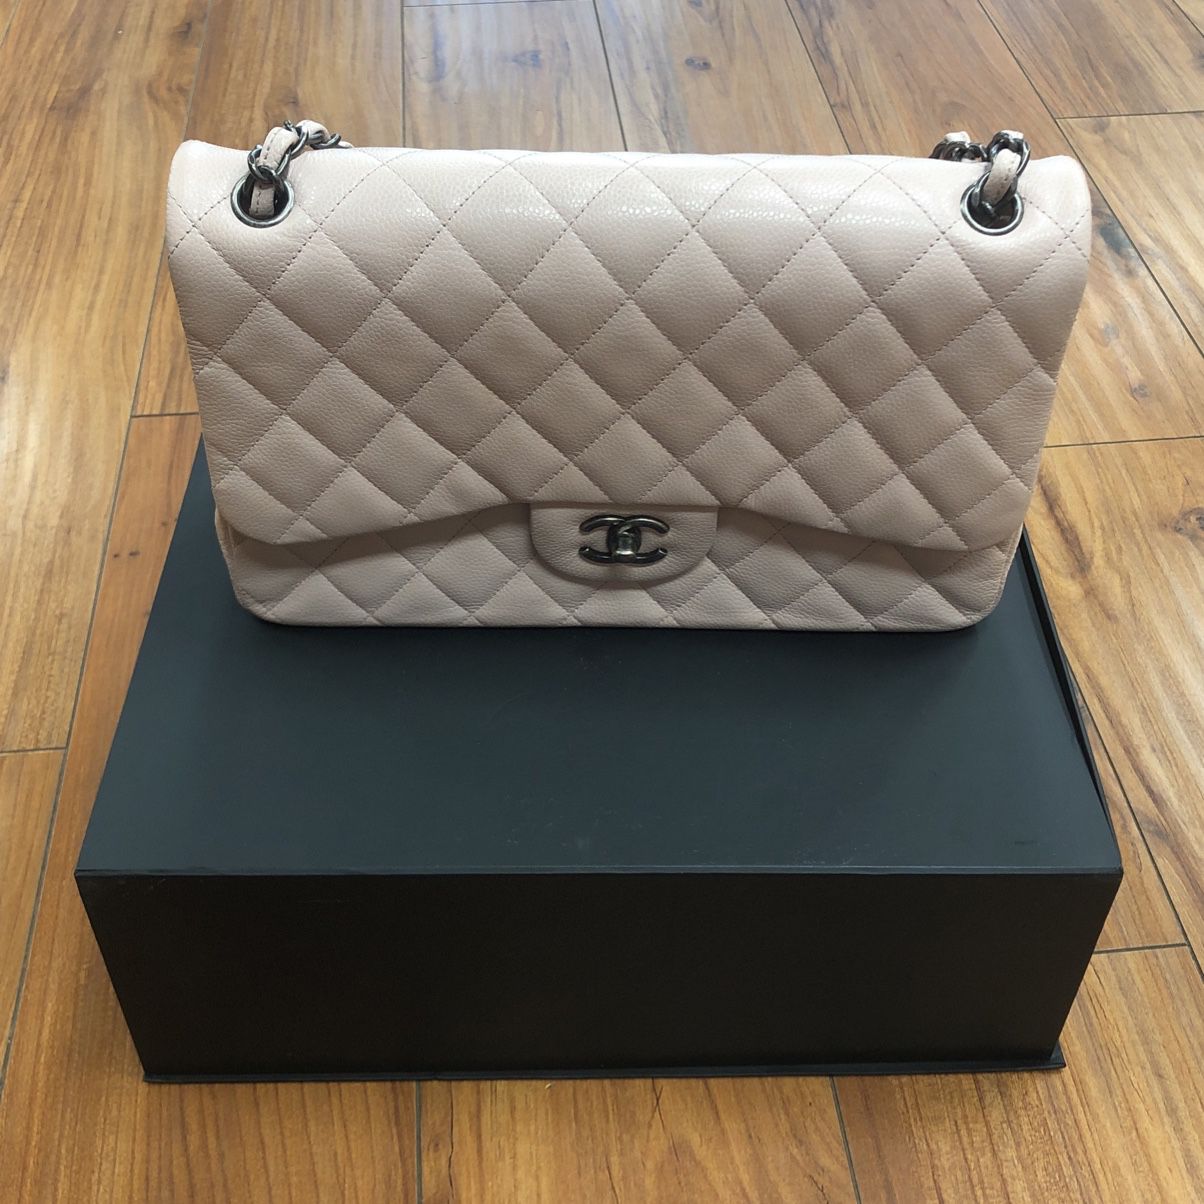 Chanel Classic Small Double Flap Beige Quilted Caviar with gold